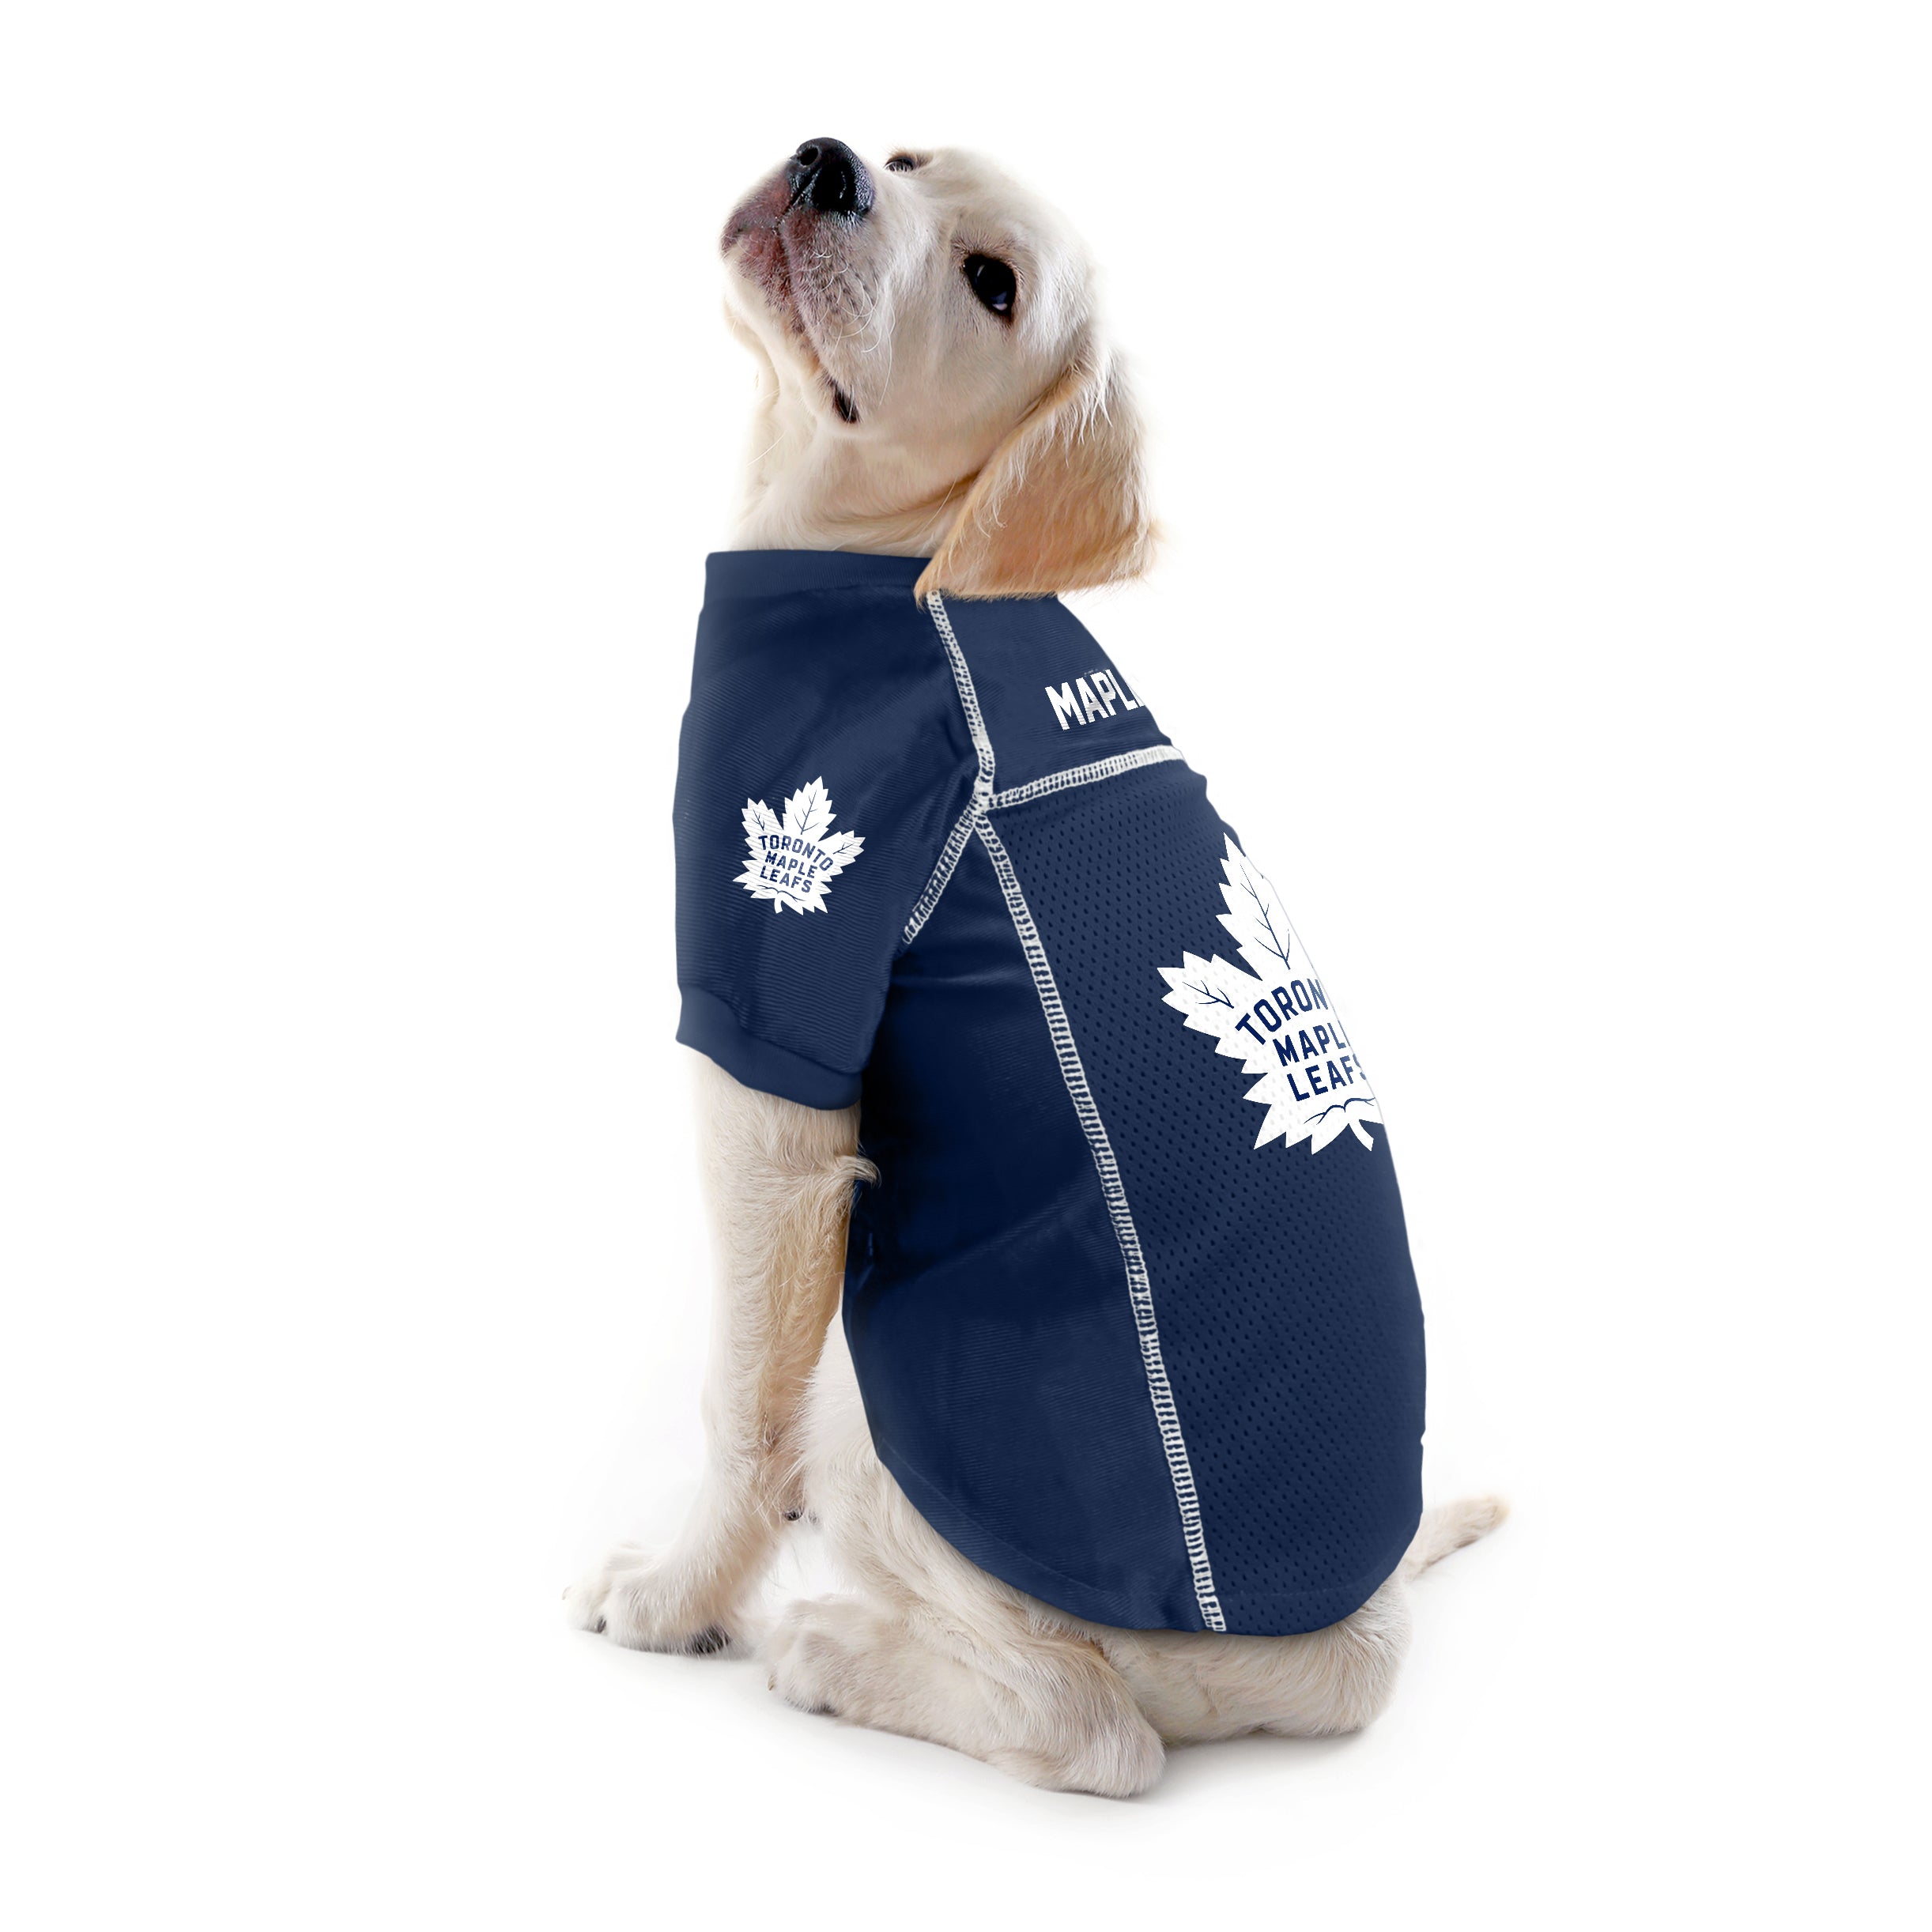 Pets First NHL Toronto Maple Leafs Mesh Jersey for Dogs and Cats